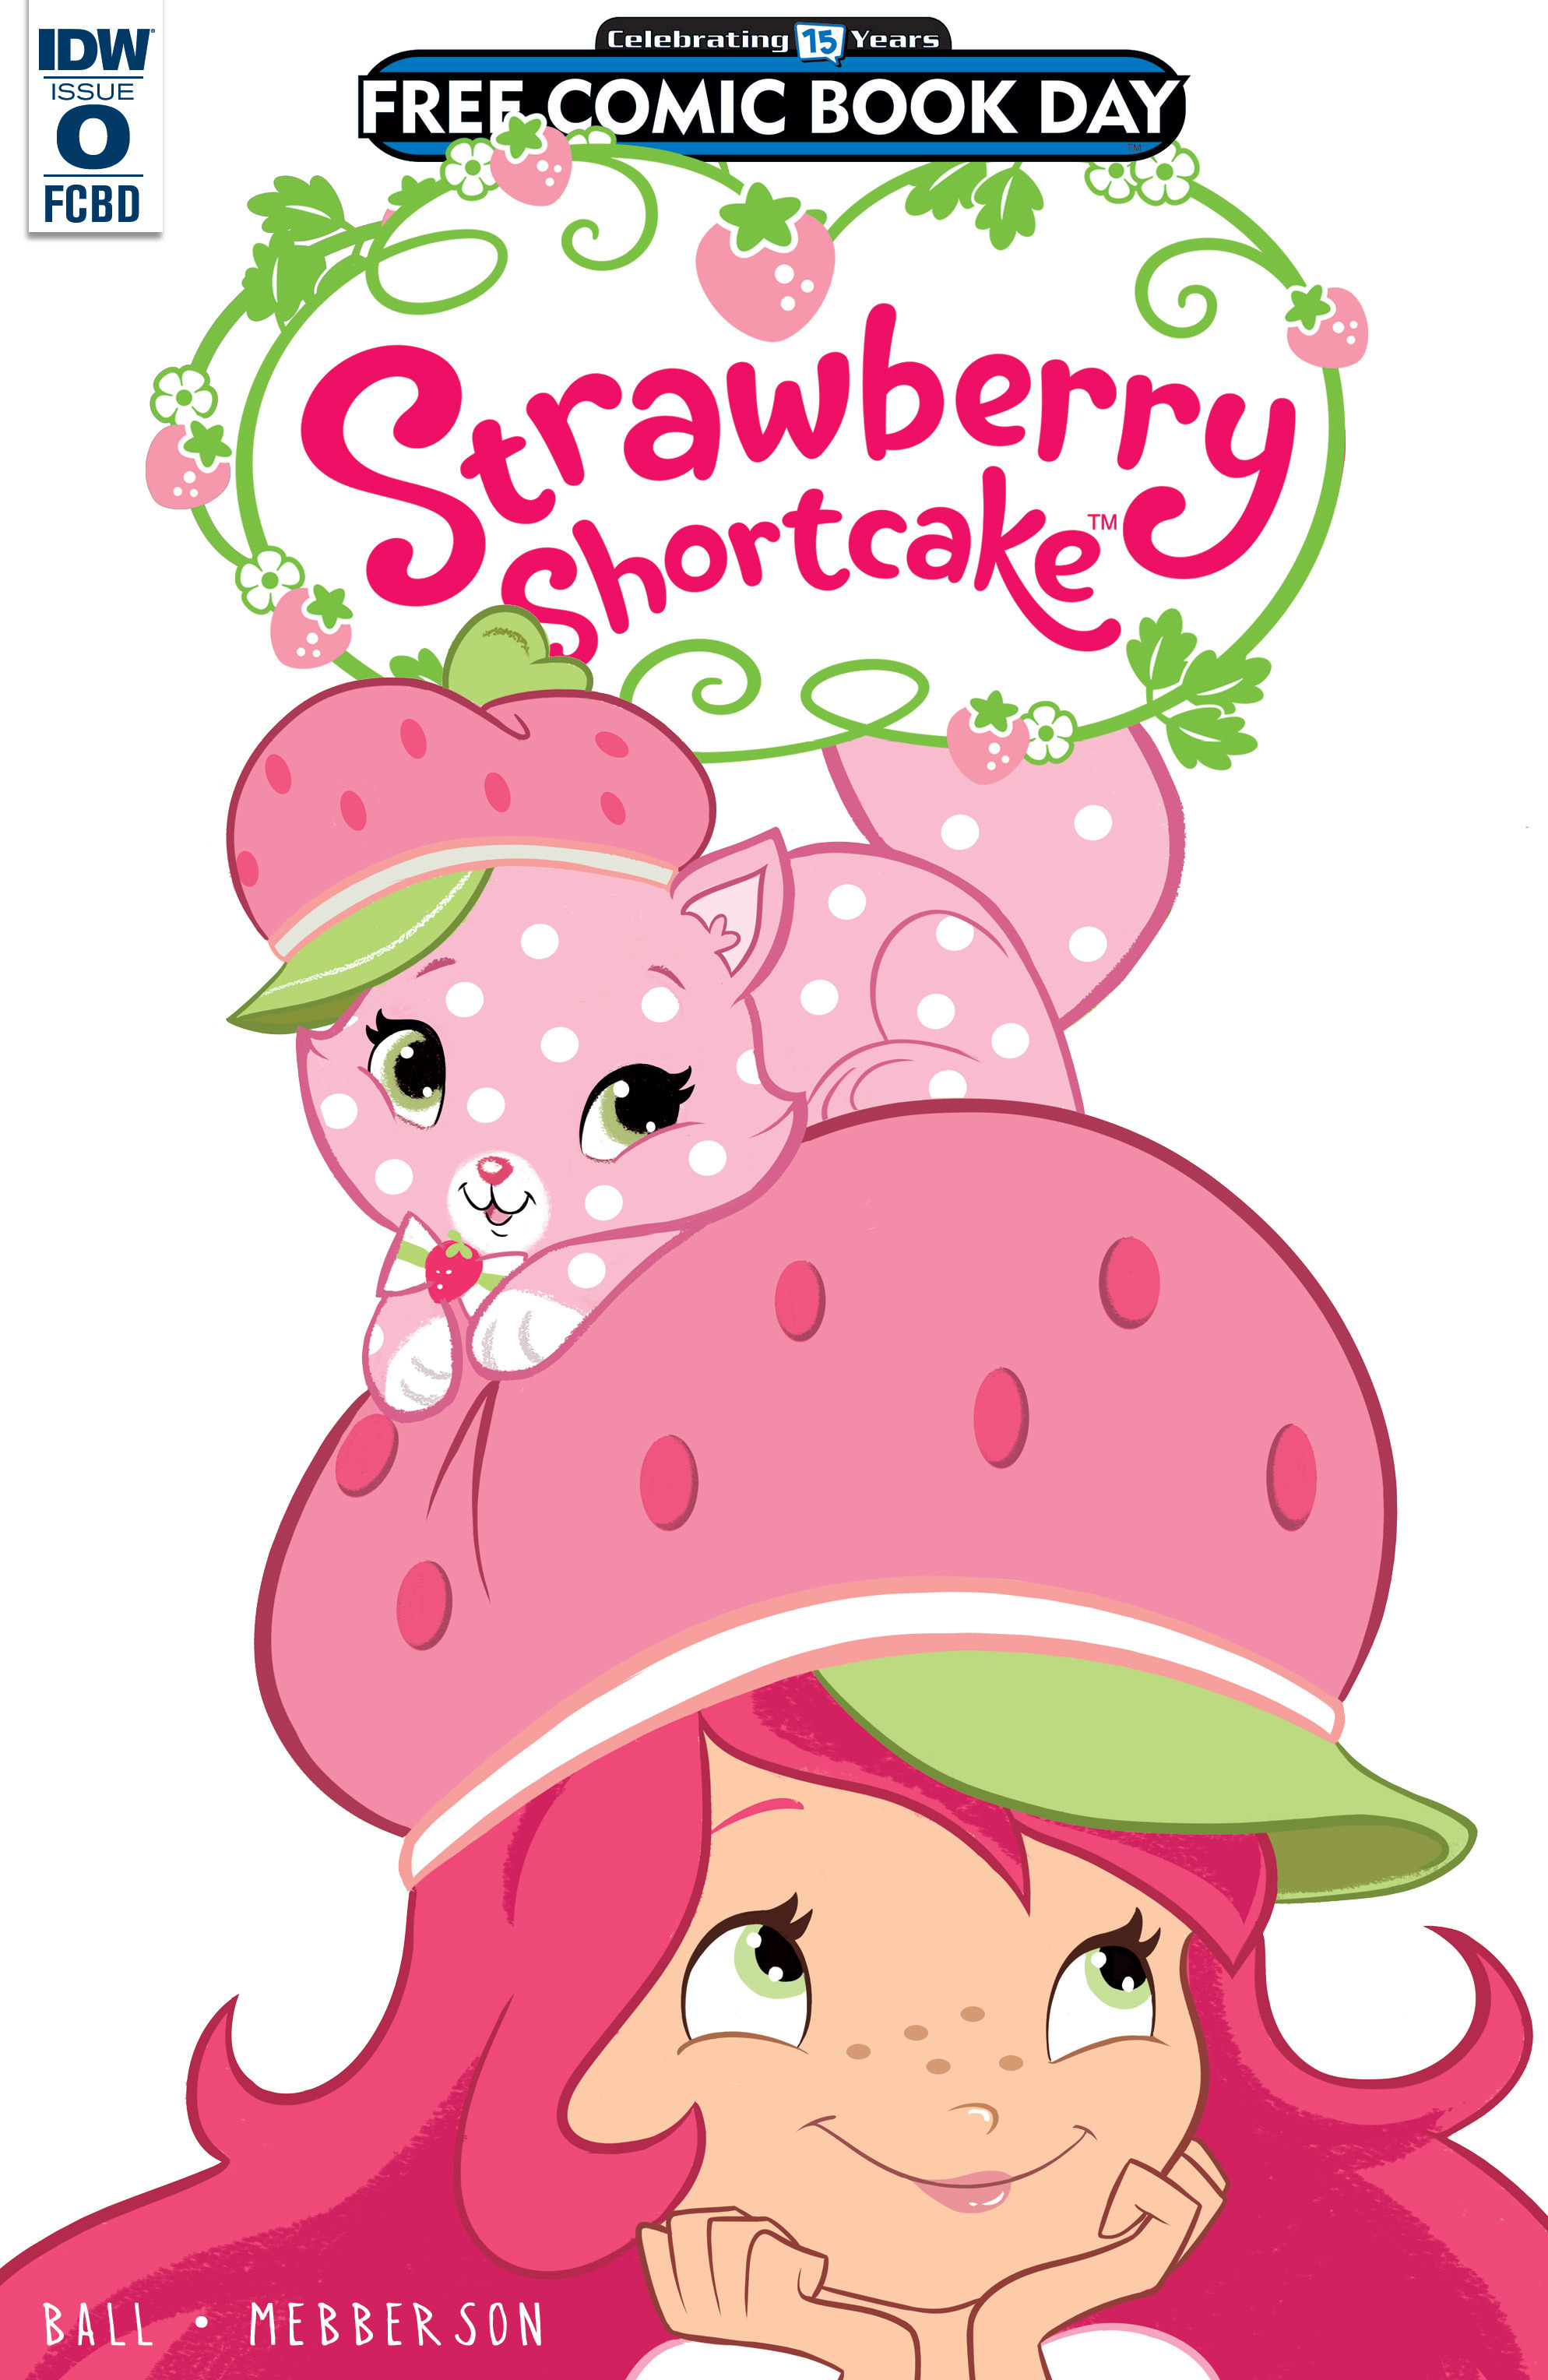 Read online Free Comic Book Day 2016 comic -  Issue # Strawberry Shortcake - 1